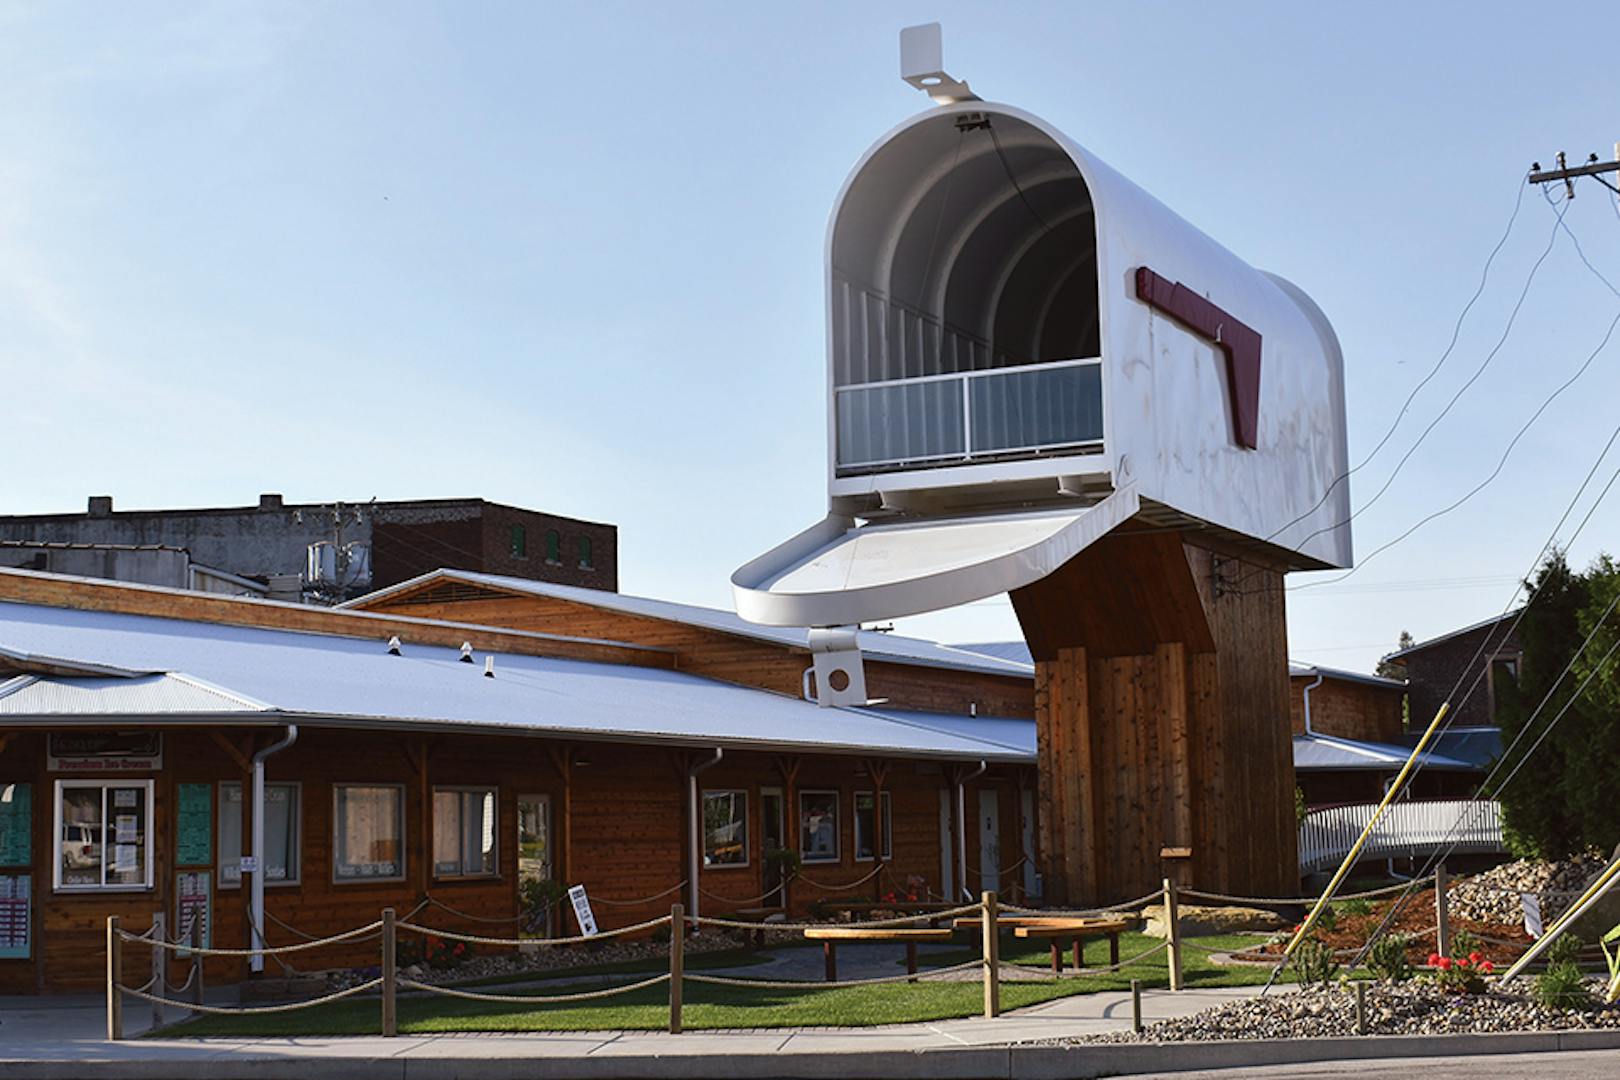 The World’s Largest Mailbox in Casey, Illinois (photo courtesy of Casey Chamber of Commerce)